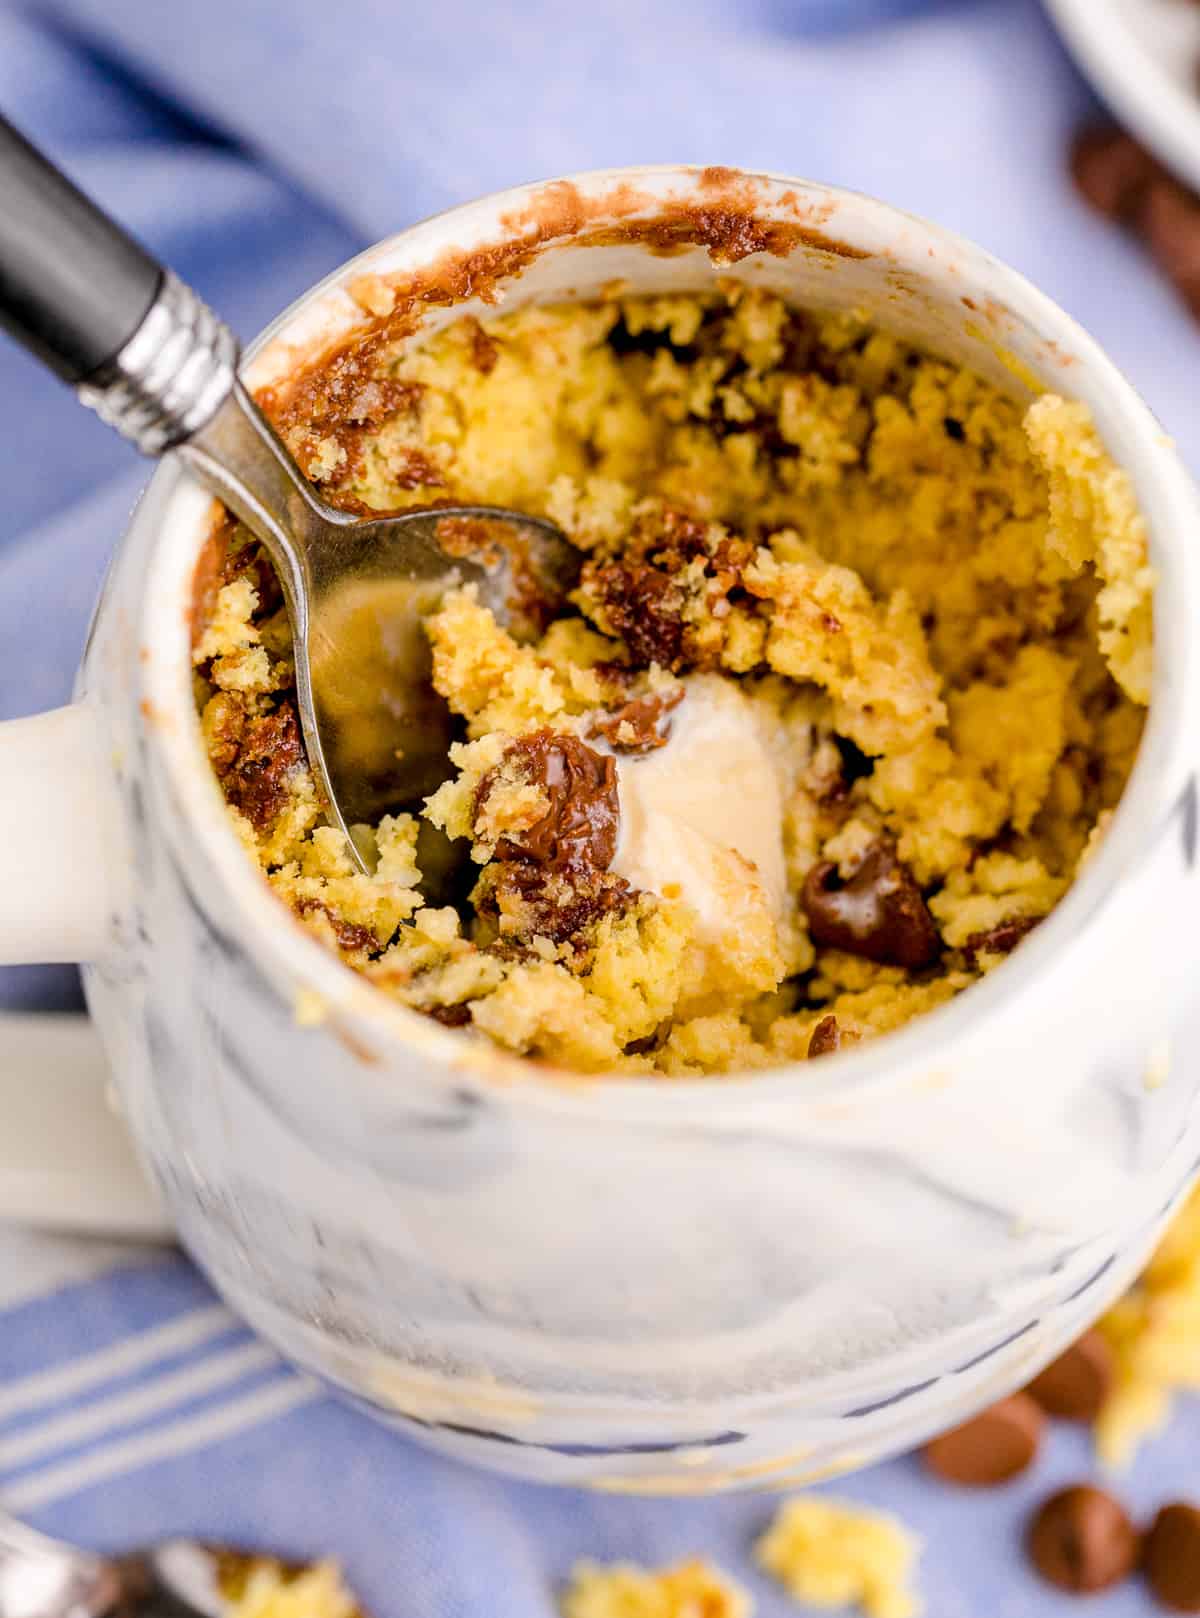 Close up of Chocolate Chip Mug Cake with some scoops removed showing inside with some ice cream.